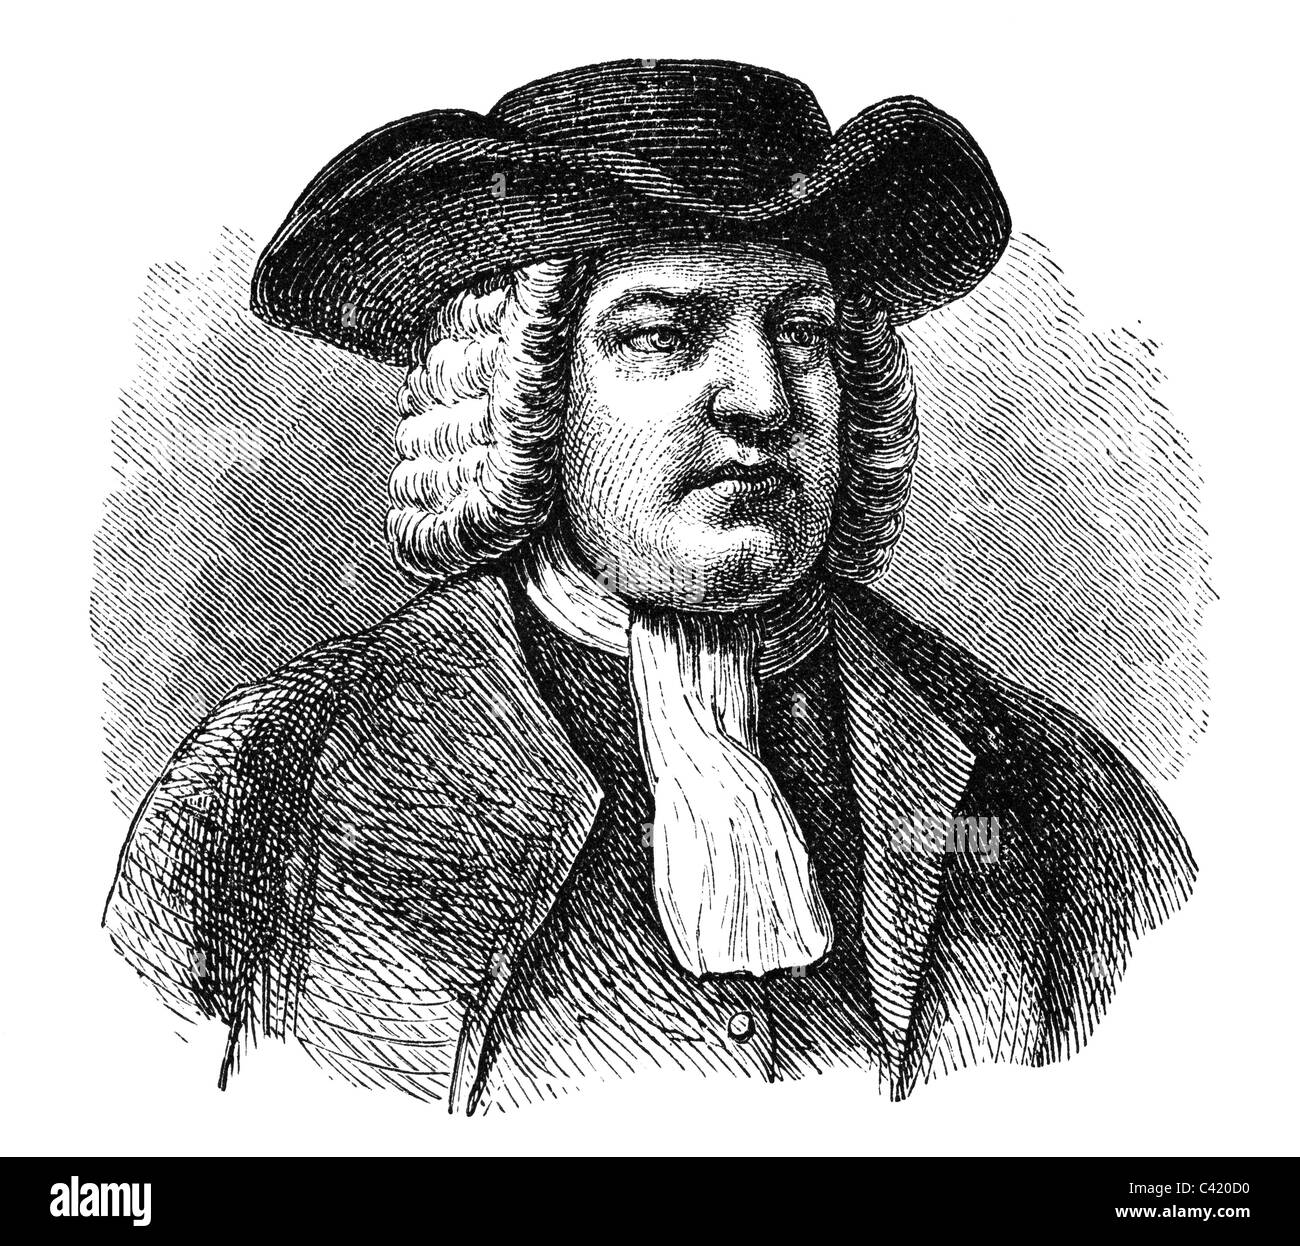 Penn, William, 14.10.1644 - 30.7.1718, English politician, Quaker, founder of Pennsylvania, portrait, with hat, wood engraving, 19th century, Stock Photo